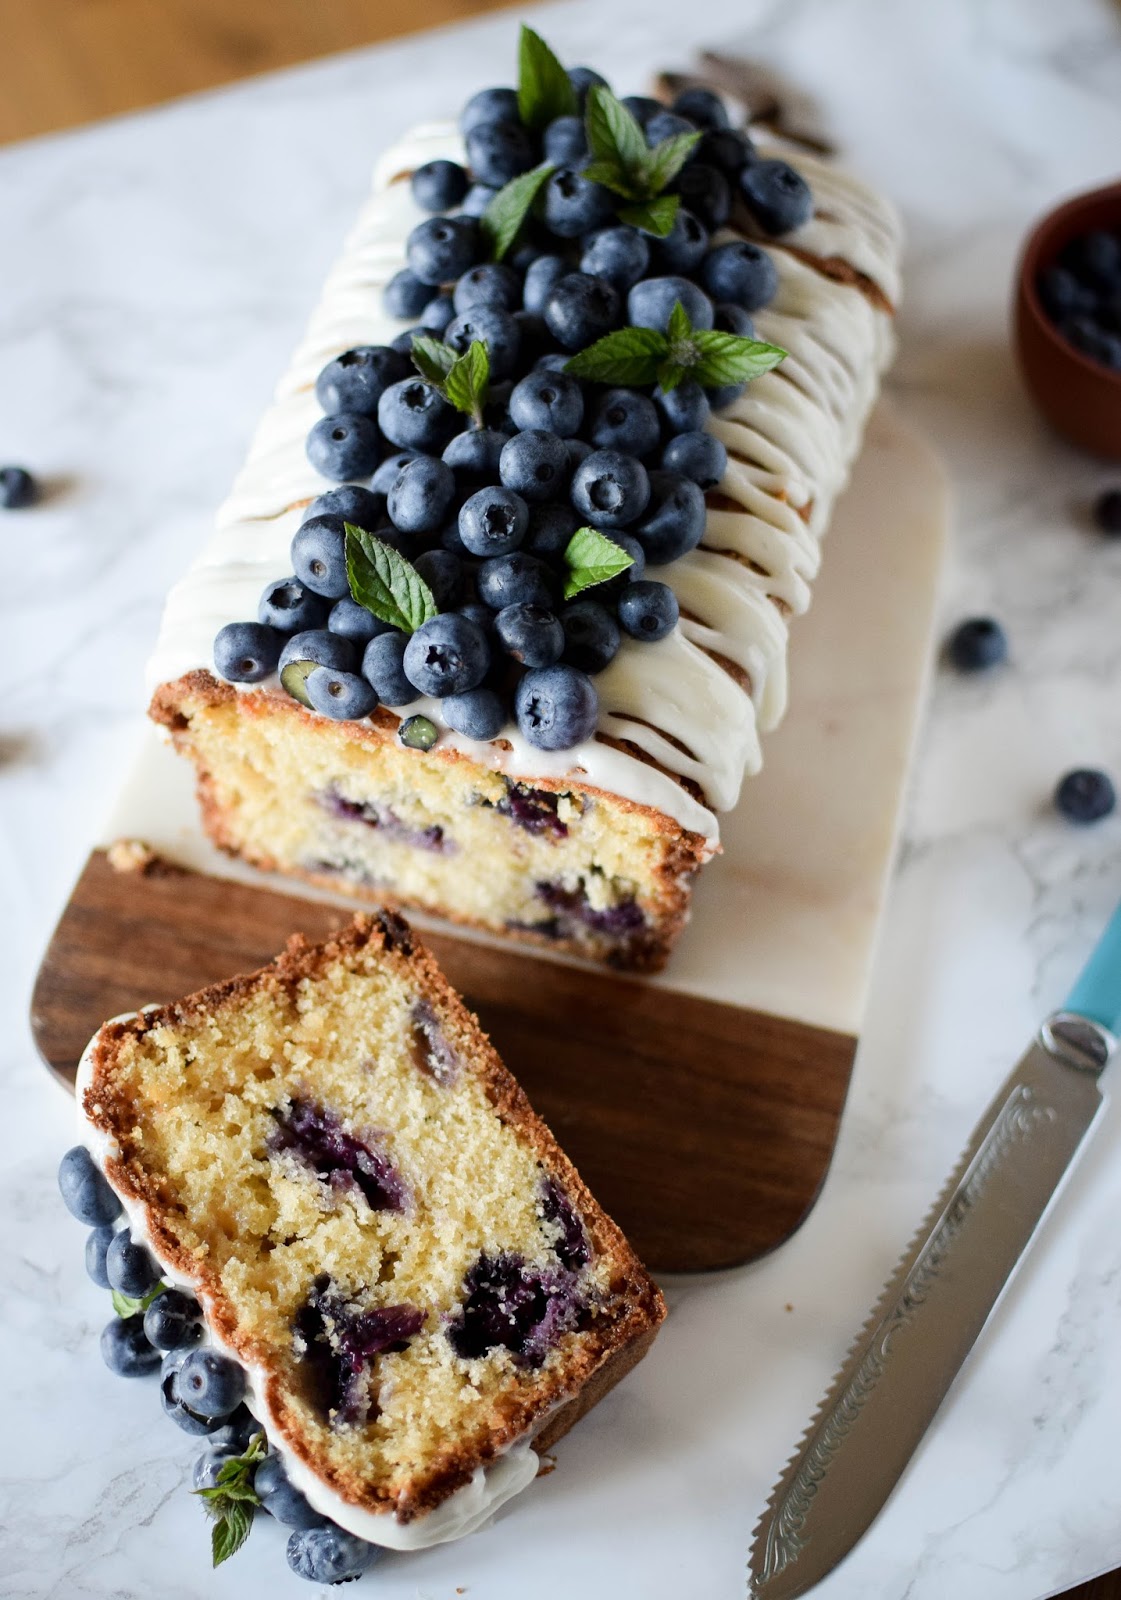 Blueberry and White Chocolate Cake